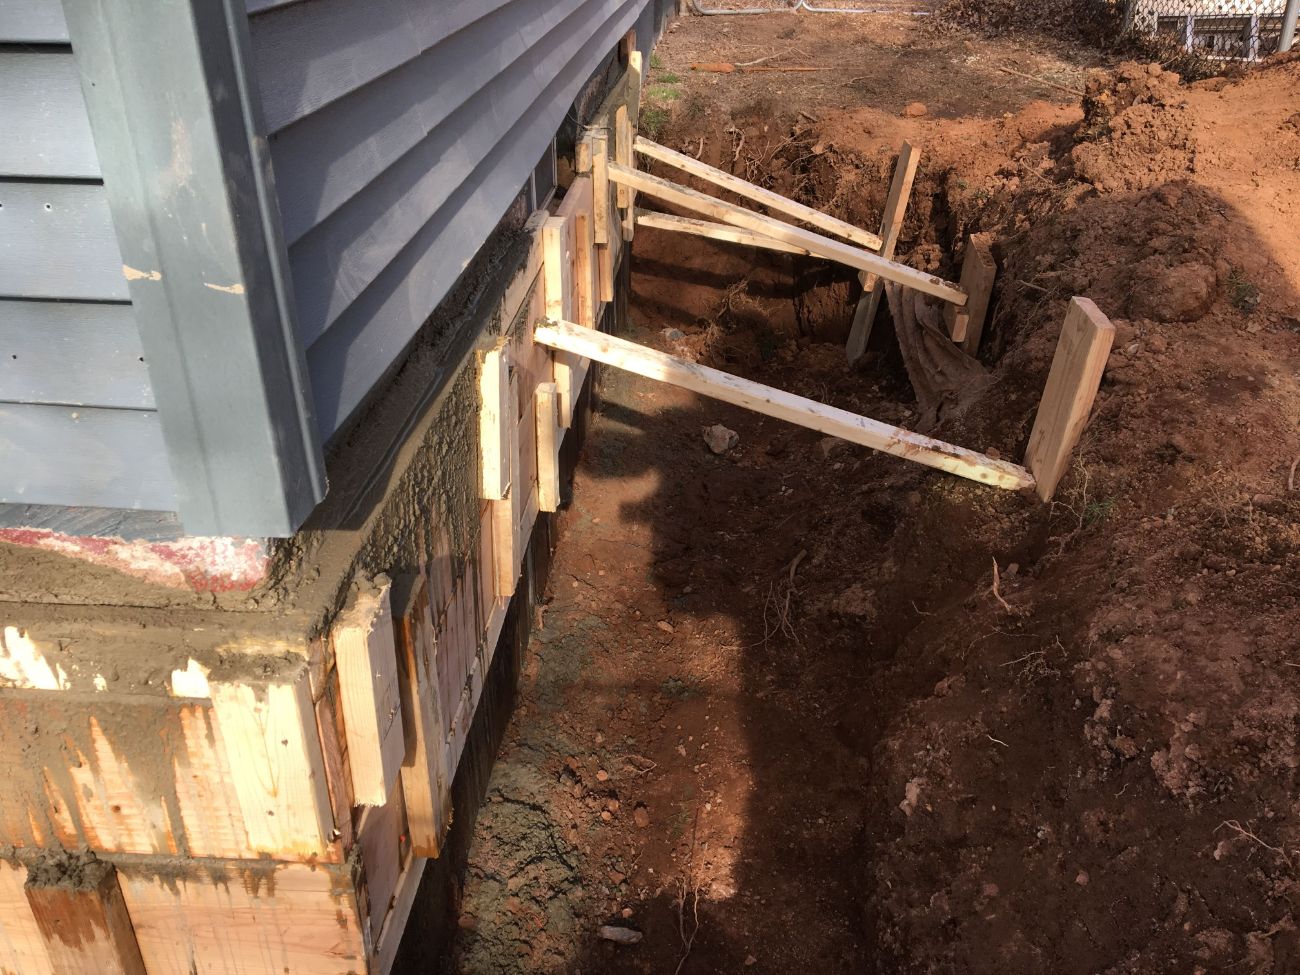 What To Expect From A Wood Foundation: Benefits & Potential Problems -  Regional Foundation Repair